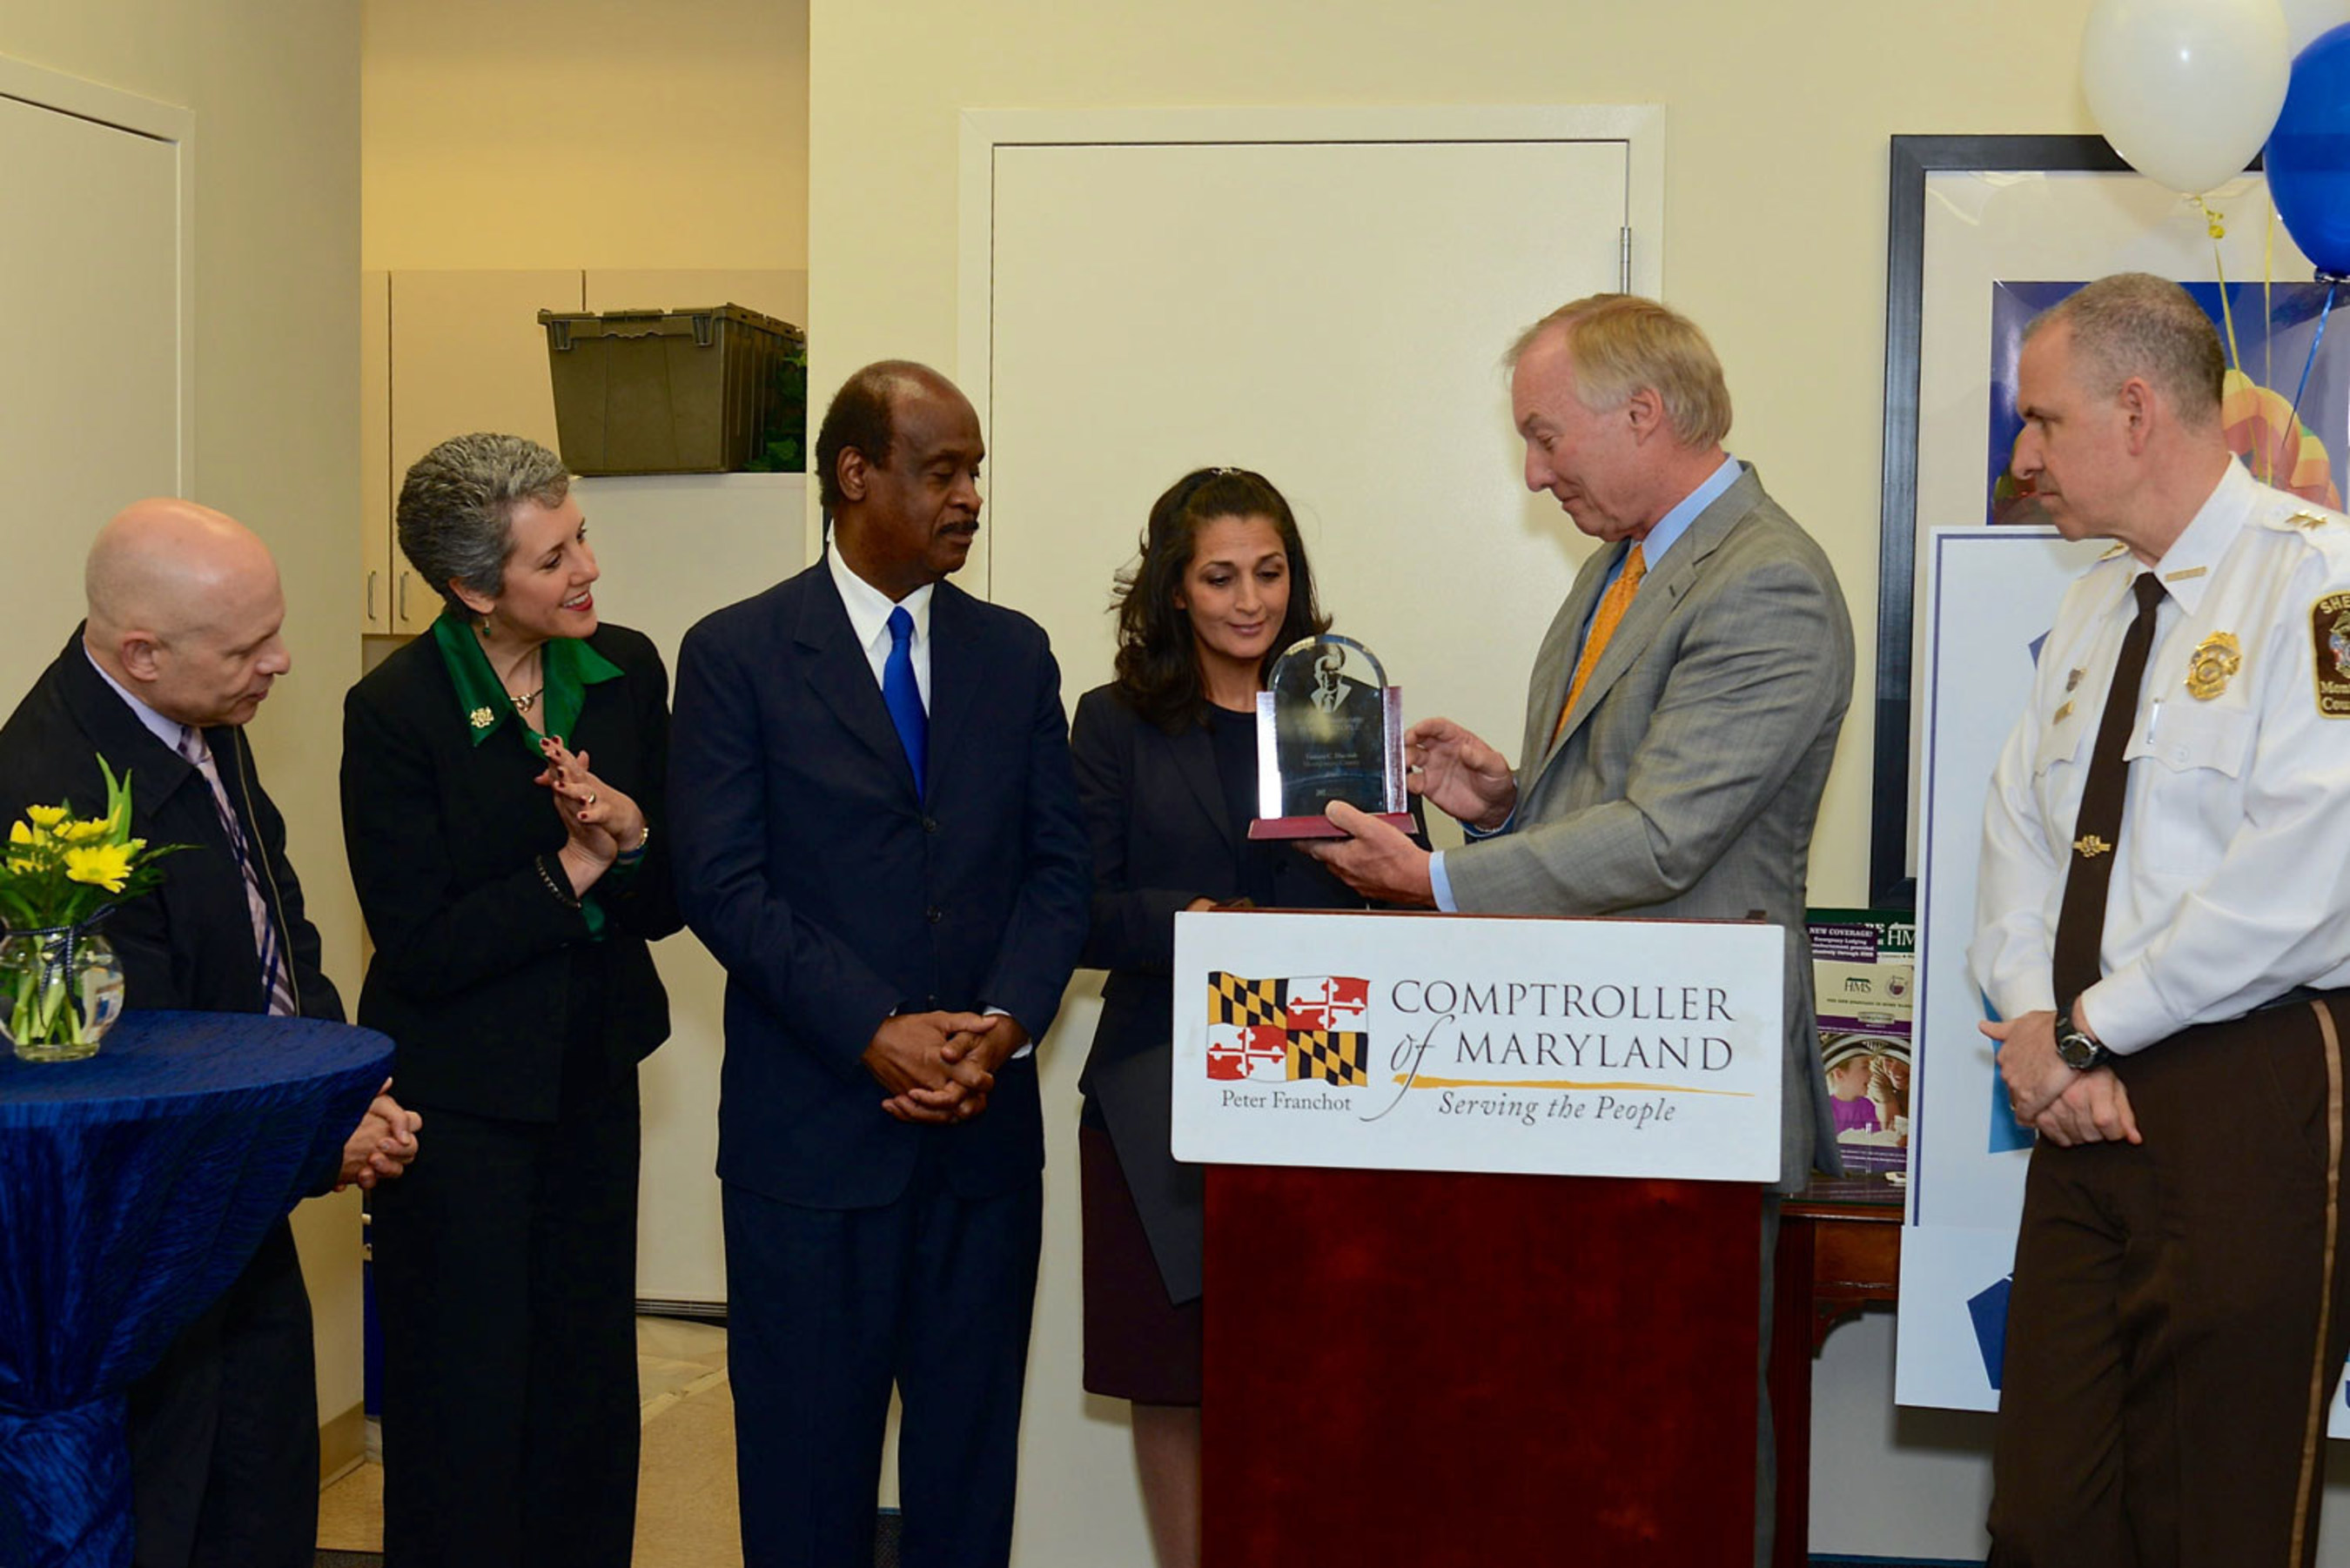 Maryland Comptroller, Peter Franchot presents the 2015 William Donald Schaefer Helping People Award to Tammy Darvish. Looking on from left to right are Jeffery Slavin, Mayor of Sommerset, MD, Maryland State Senator, Cheryl Kagan, Montgomery County Executive, Ike Leggett and far right, Montgomery County Sheriff, Darren Popkin